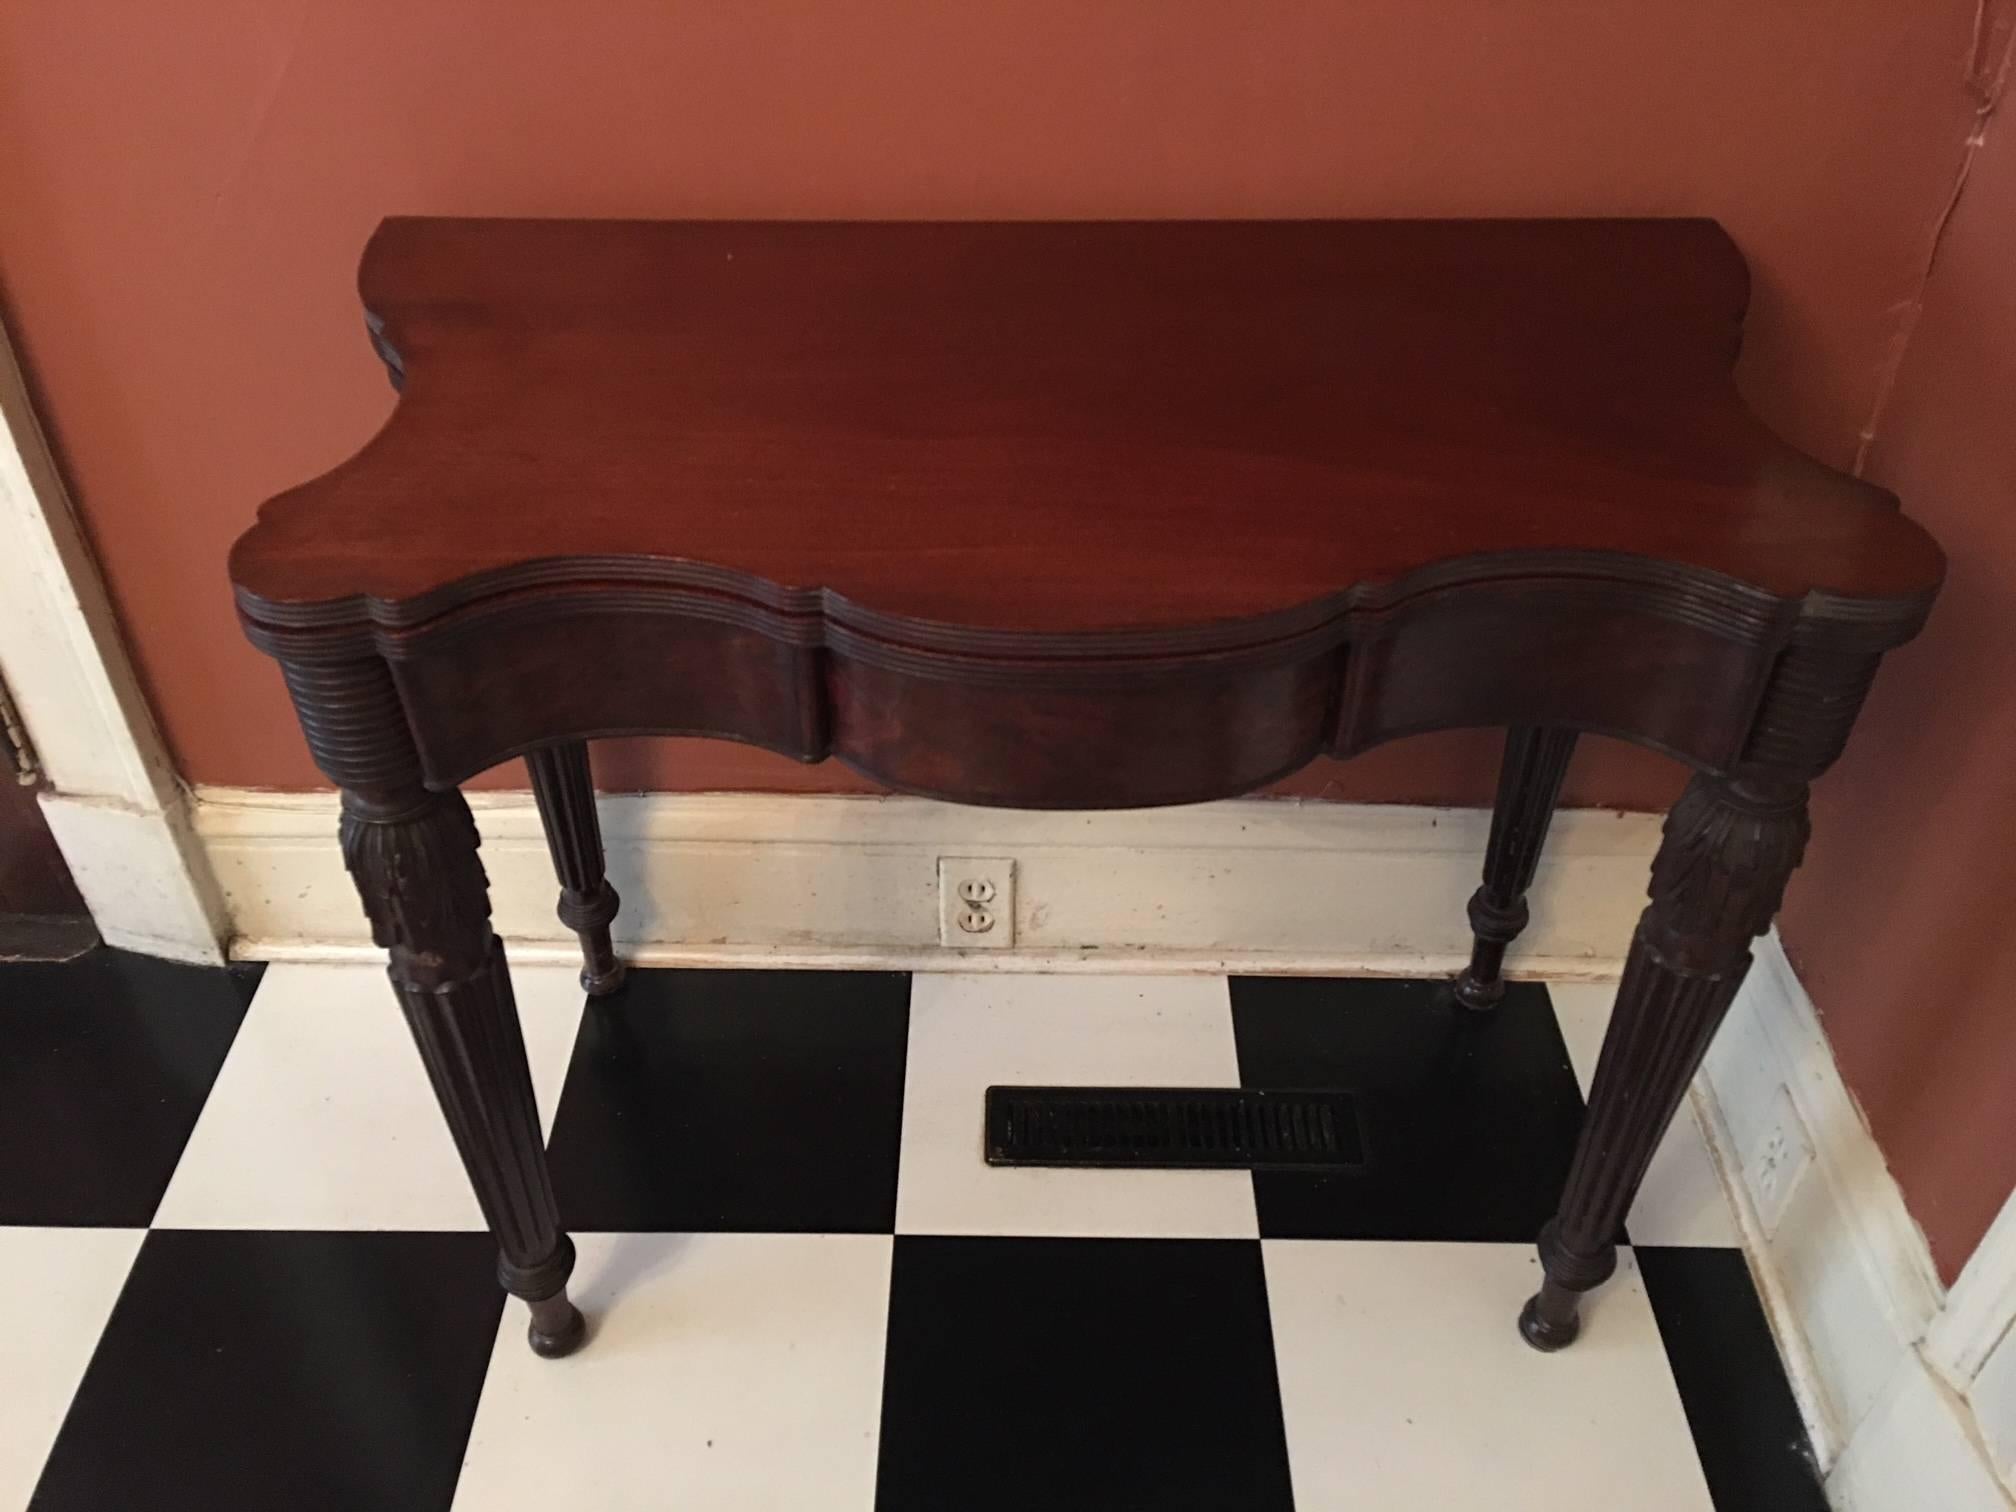 Mahogany American Games Table with Acanthus Leaves Decoration and Tapered Leg, circa 1810